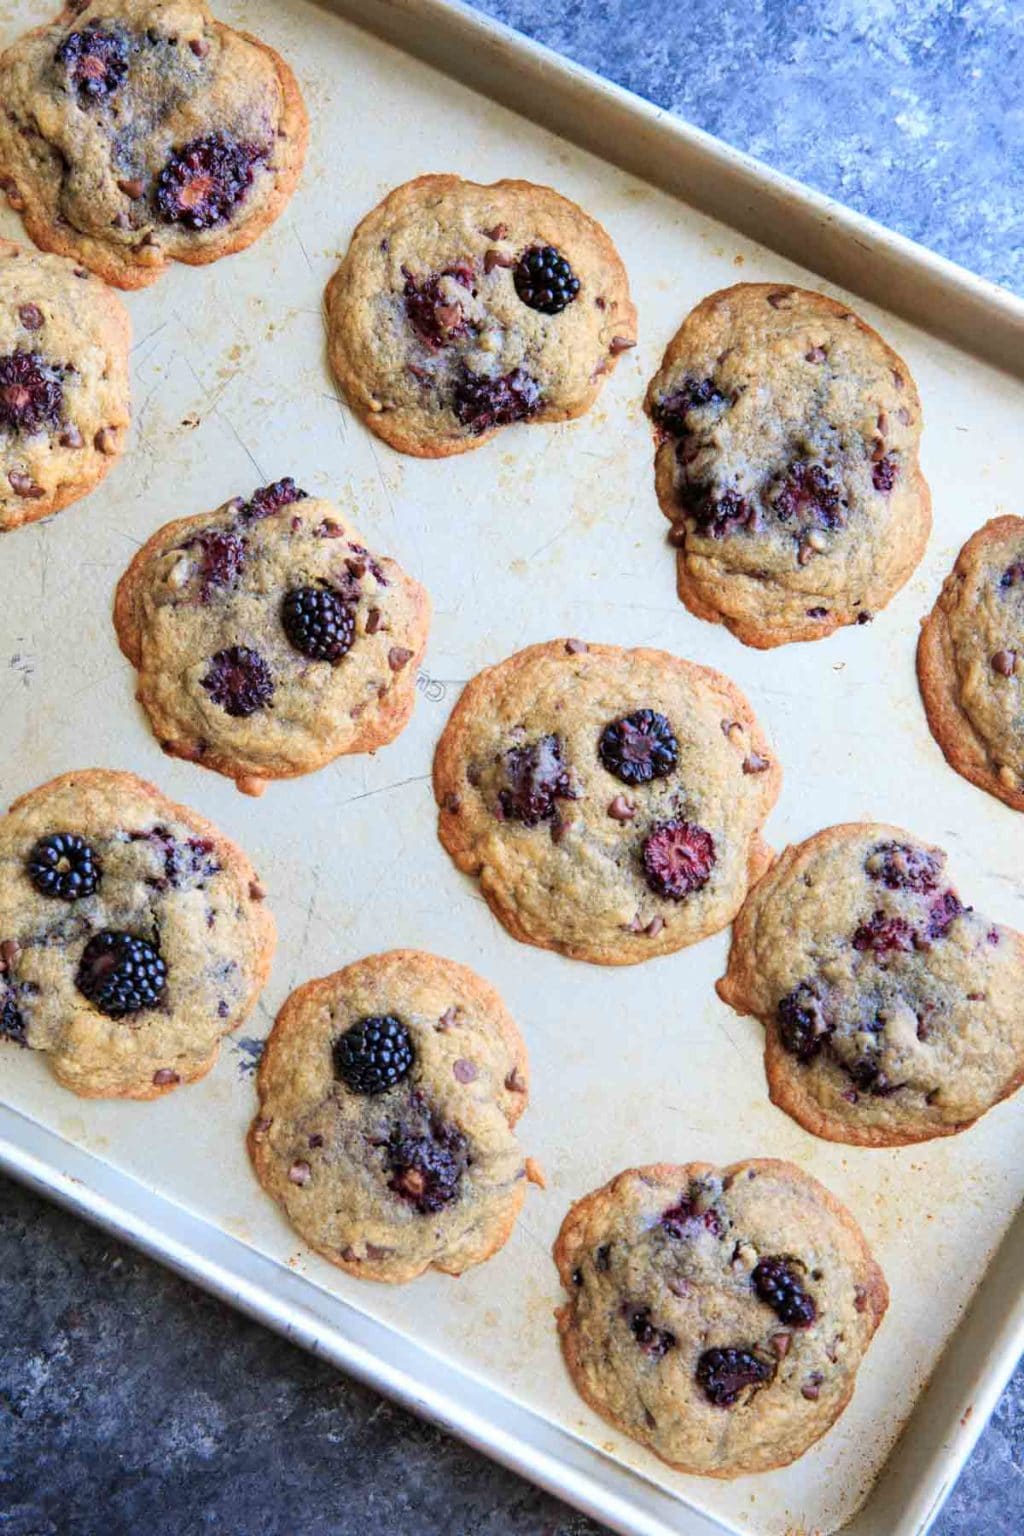 Blackberry Lavender Chocolate Chip Cookies - a unique twist on the classic with some fruit and dried lavender. Perfect dessert in summertime!